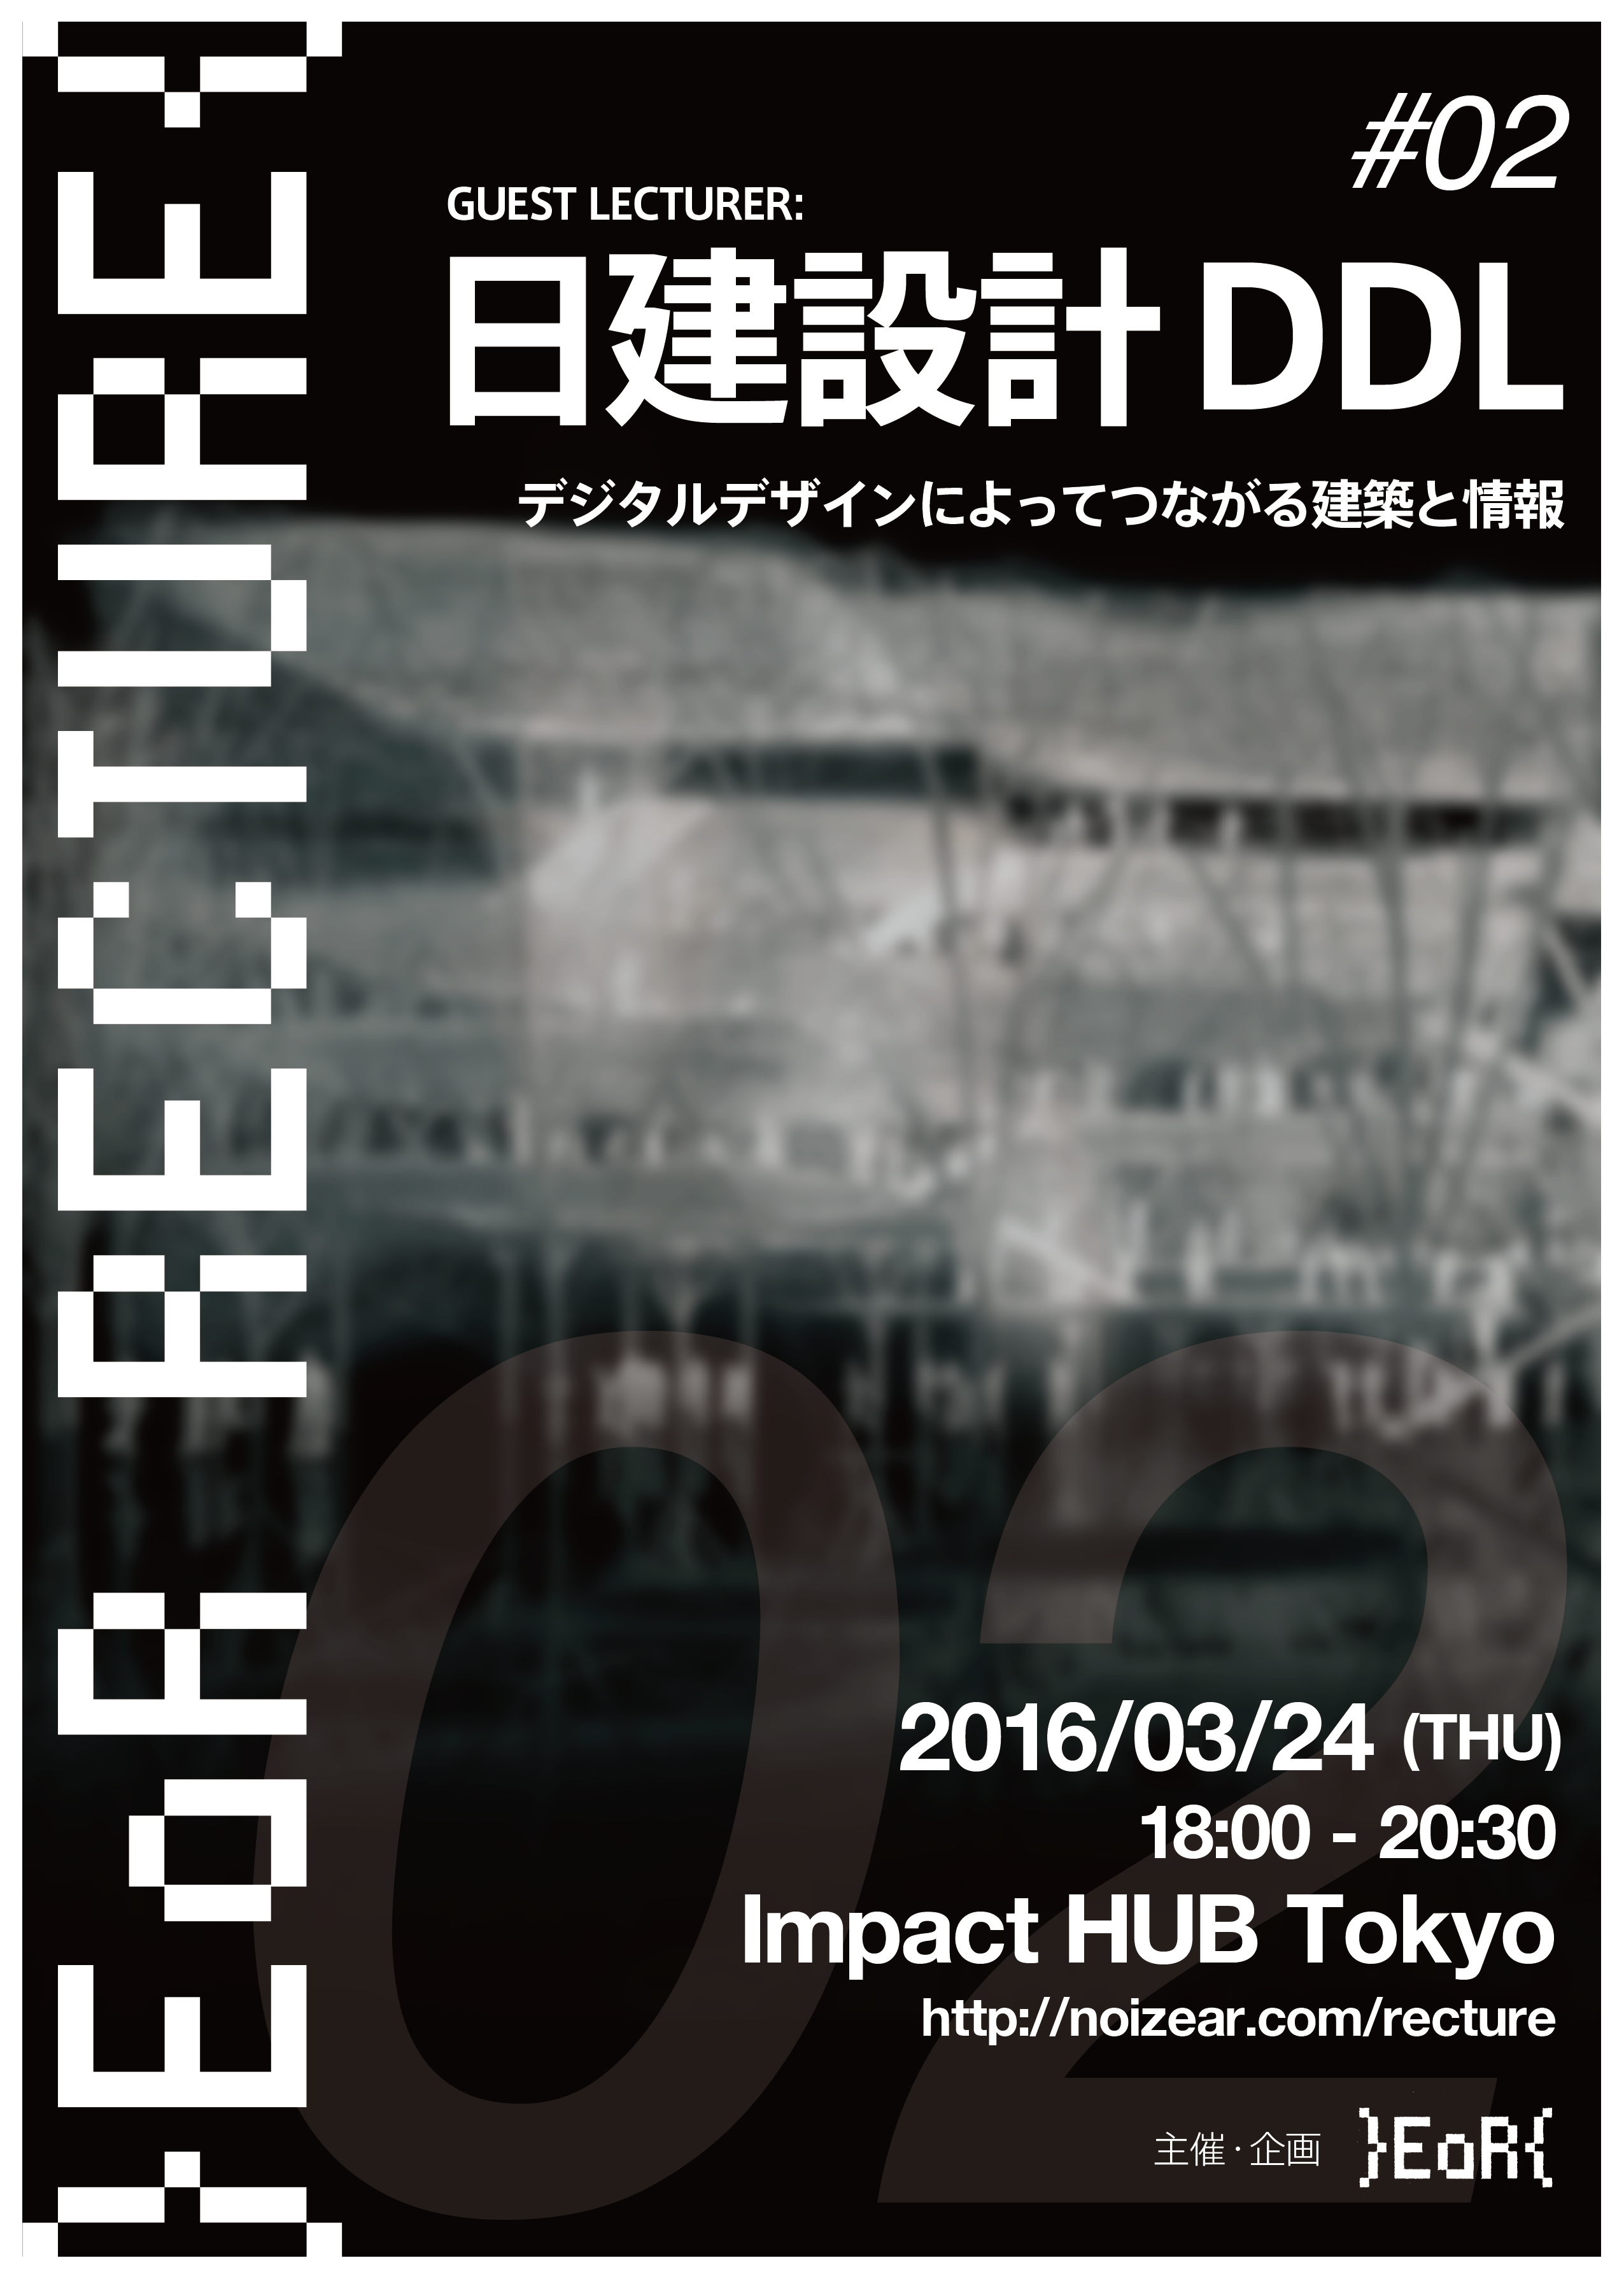 RECTURE-02-DDL-01